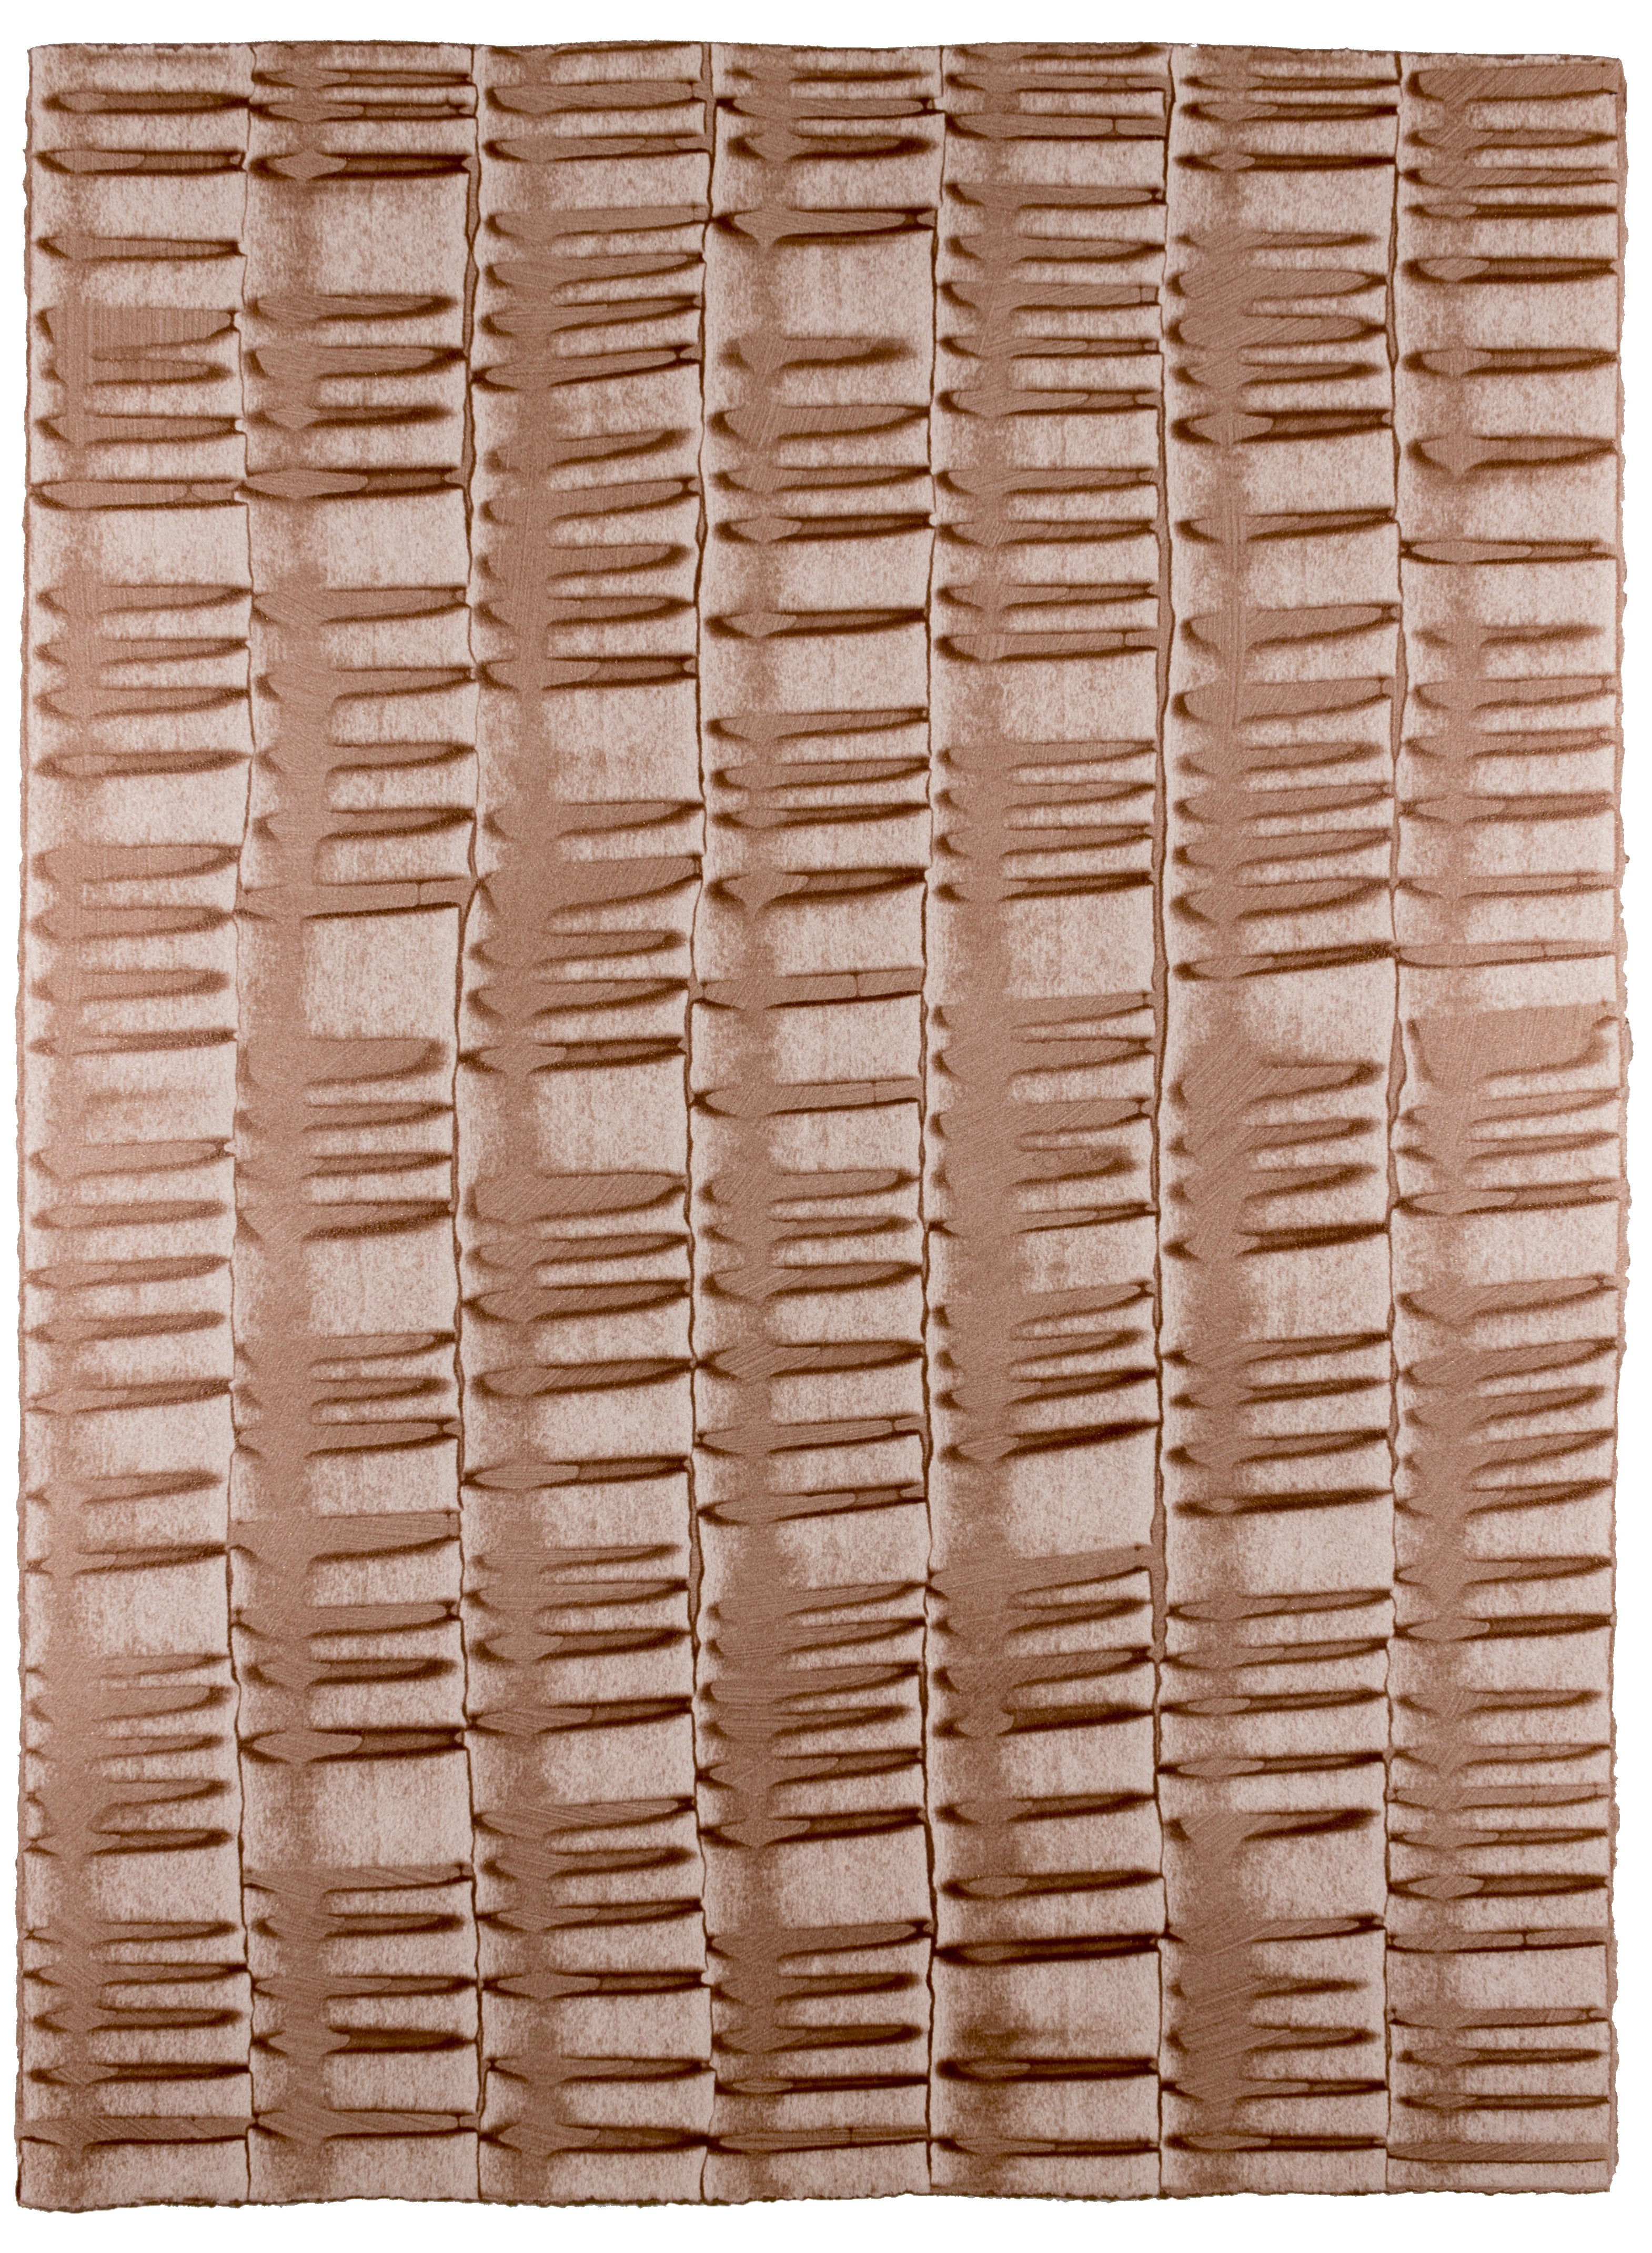 Sheet of hand-painted wallpaper with an undulating ribbon pattern in copper.